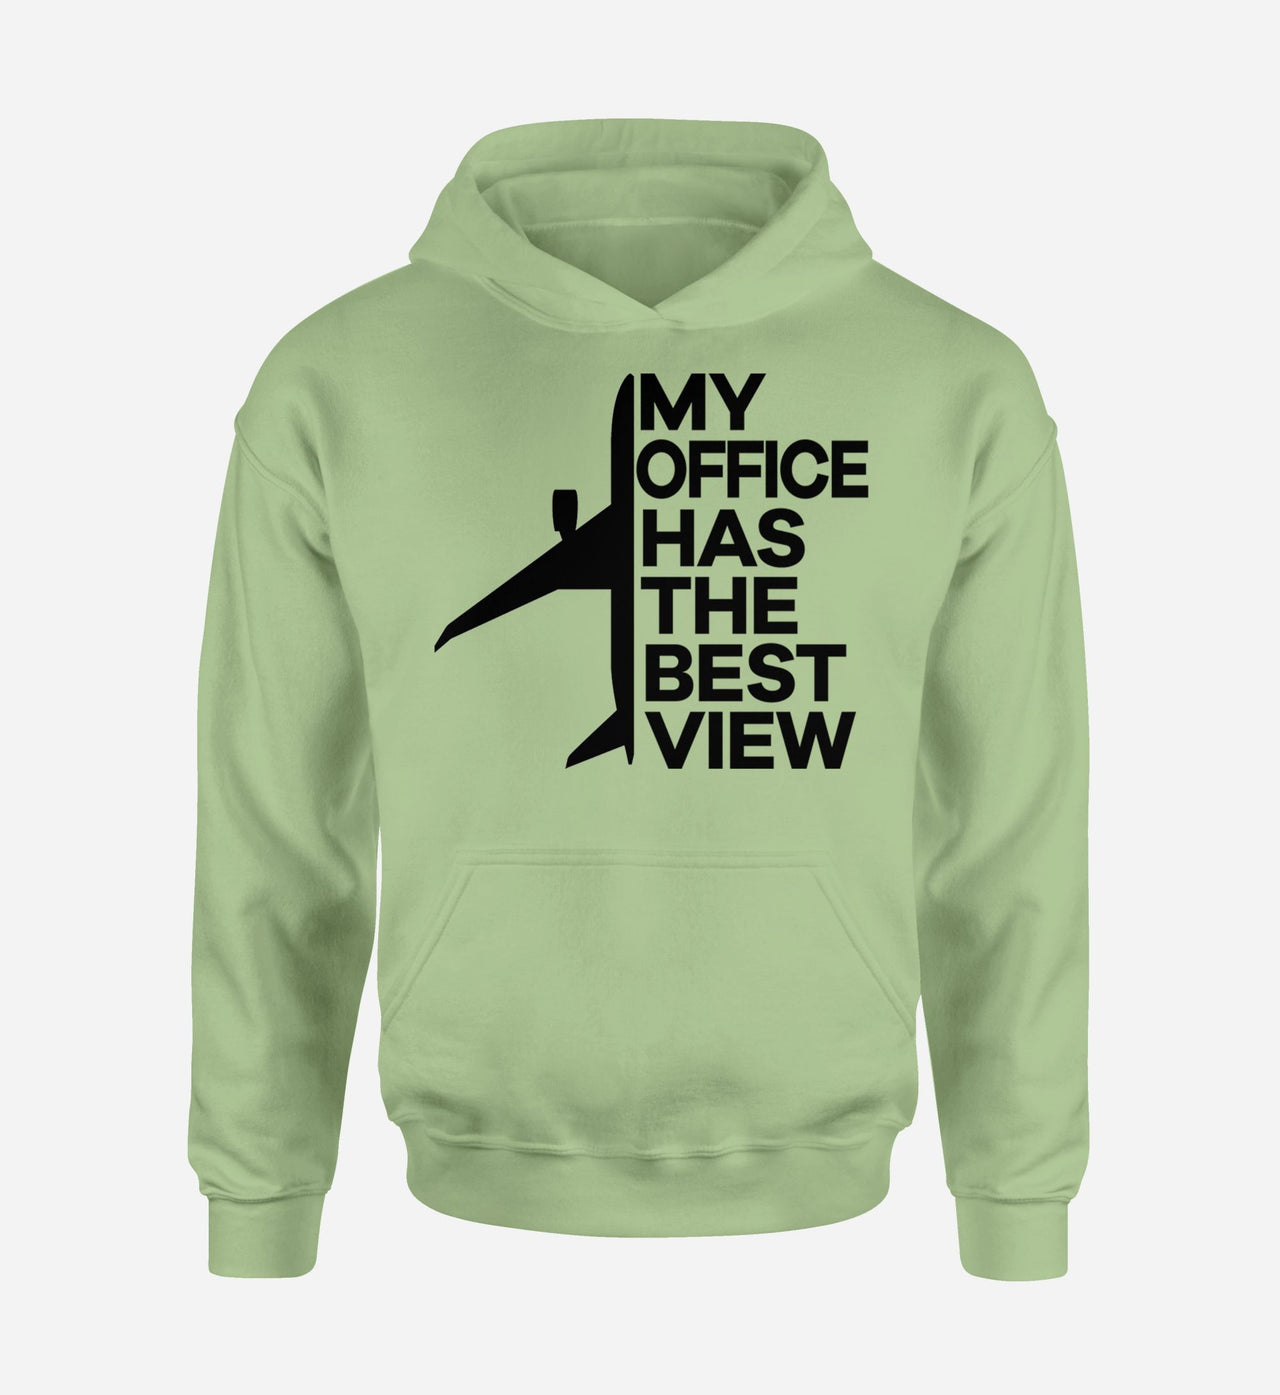 My Office Has The Best View Designed Hoodies